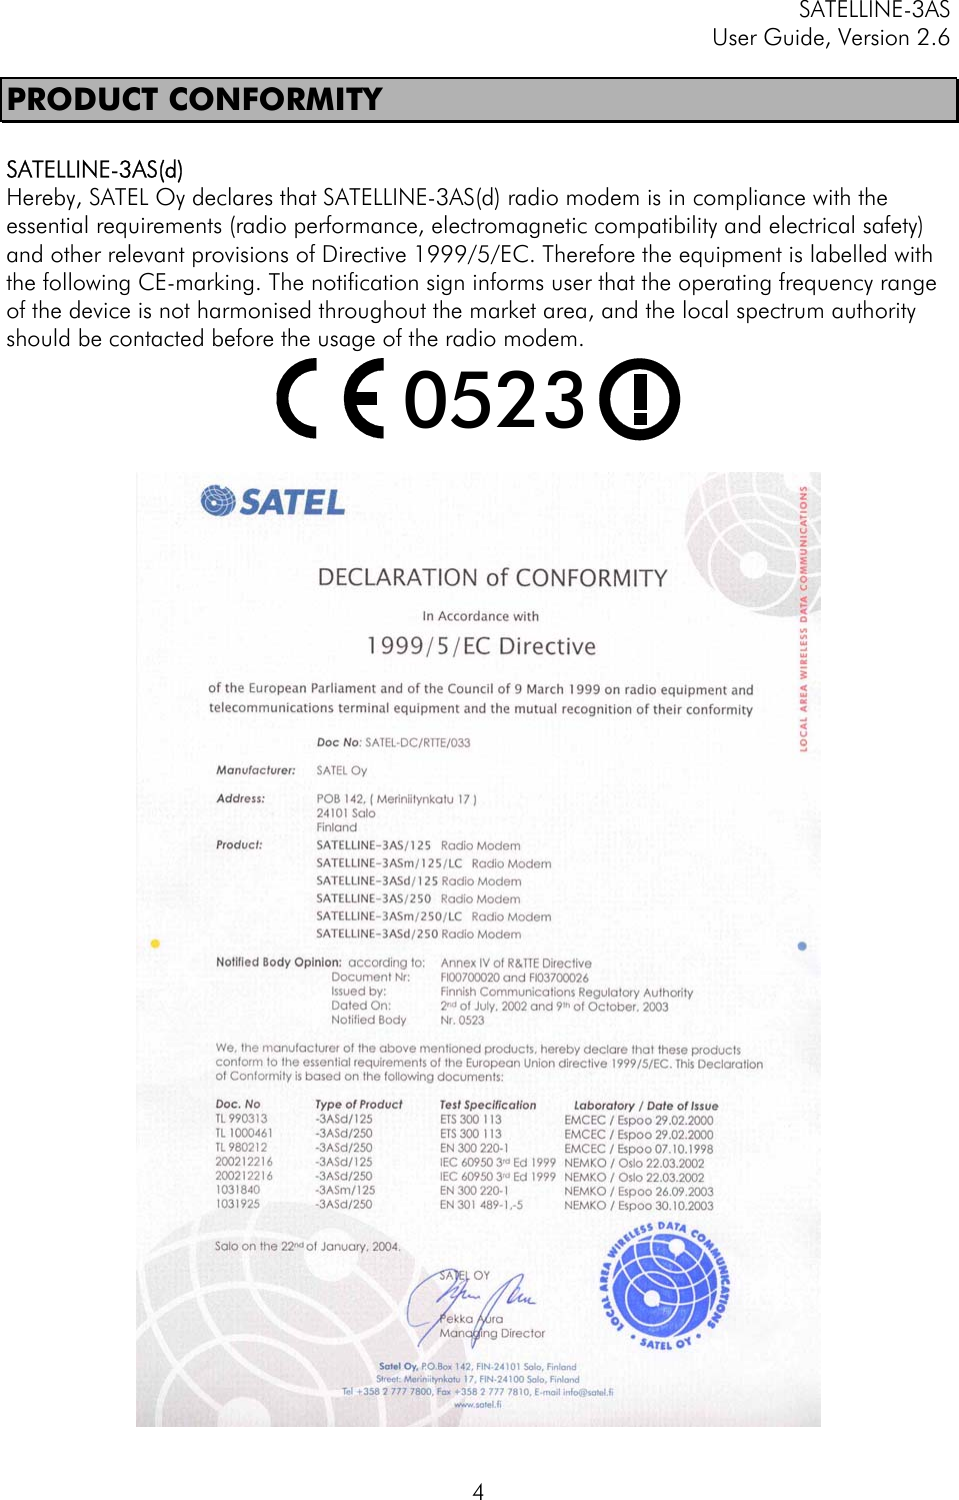 SATELLINE-3AS User Guide, Version 2.6   4PRODUCT CONFORMITY  SATELLINE-3AS(d) Hereby, SATEL Oy declares that SATELLINE-3AS(d) radio modem is in compliance with the essential requirements (radio performance, electromagnetic compatibility and electrical safety) and other relevant provisions of Directive 1999/5/EC. Therefore the equipment is labelled with the following CE-marking. The notification sign informs user that the operating frequency range of the device is not harmonised throughout the market area, and the local spectrum authority should be contacted before the usage of the radio modem. 0523    